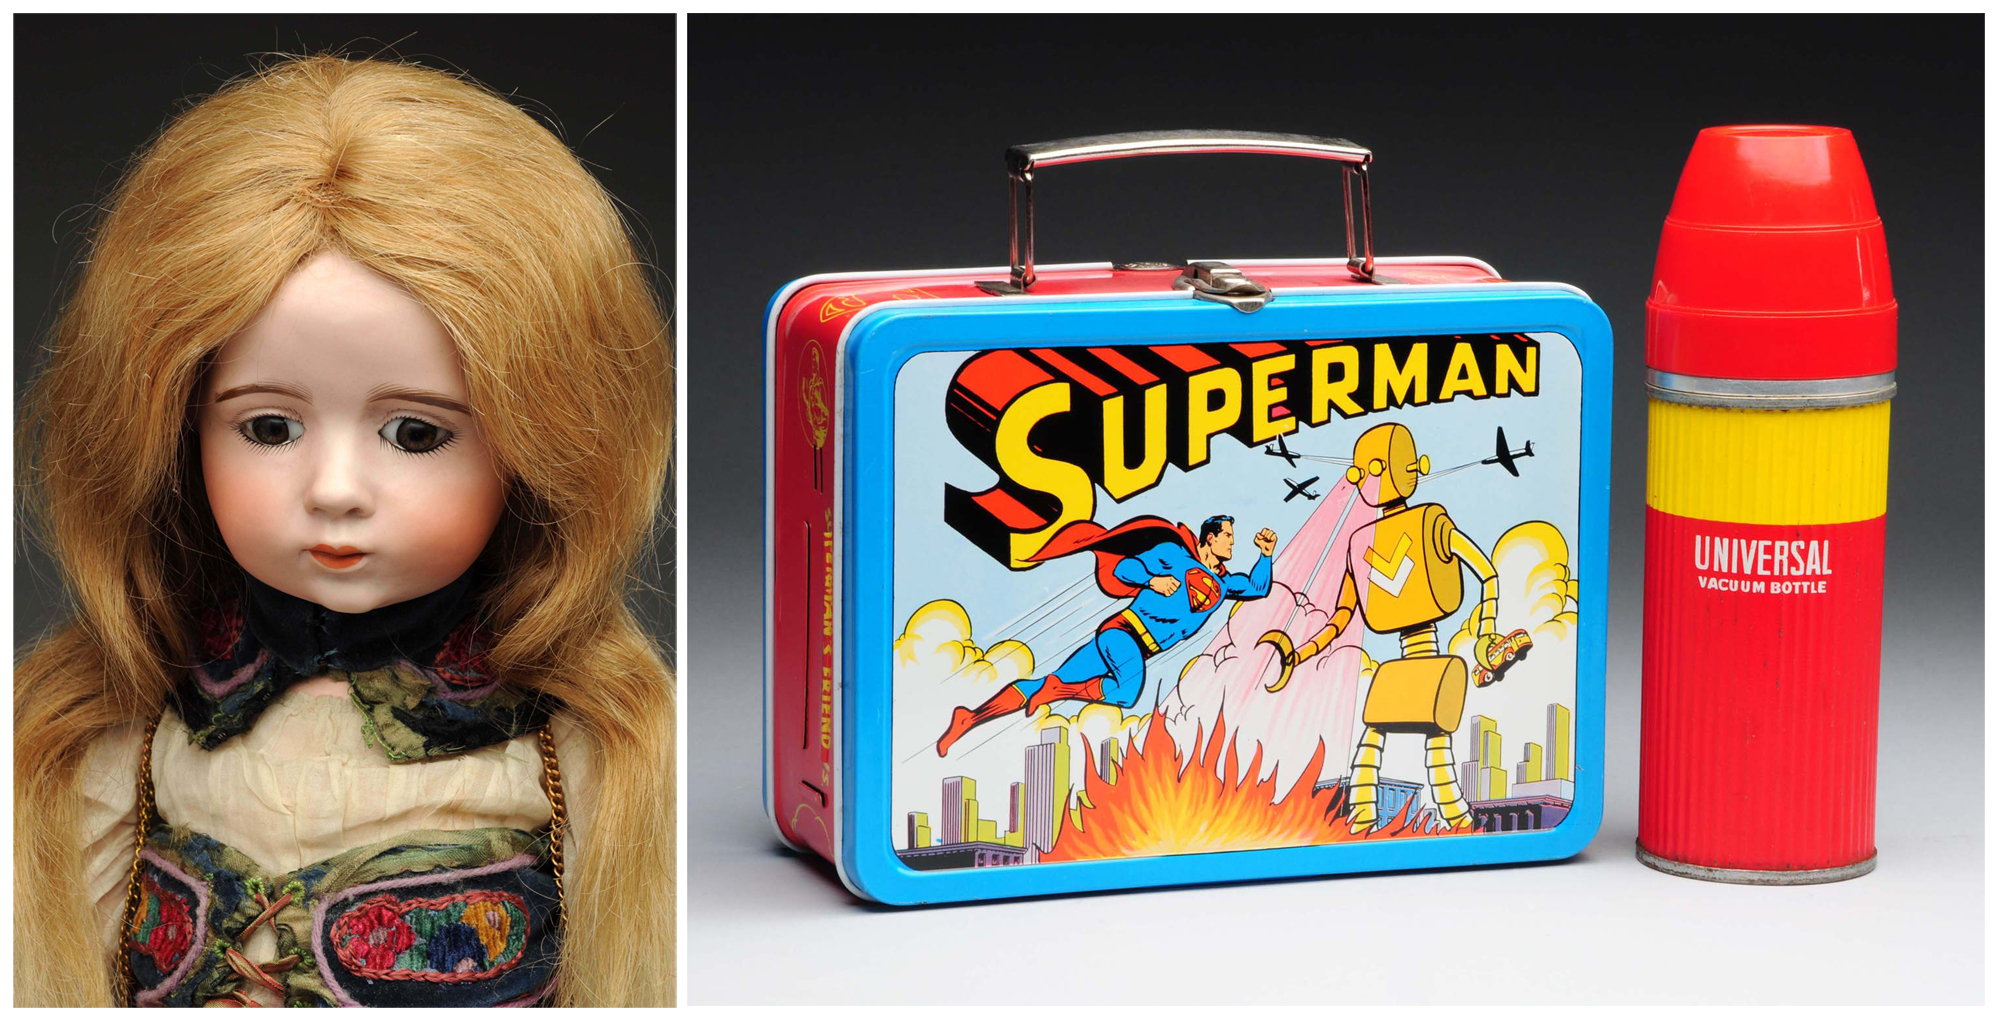 At left, 22-inch A. Marque bisque-head girl doll, circa 1914, French, all original, est. $100,000-$200,000; and at right, a very rare 1954 Superman lunchbox with Universal vacuum bottle, possibly the finest of all known examples, est. $8,000-$12,000, from a superior collection of lunchboxes included in Morphy's Sept. 10-12 auction. Morphy Auctions images.